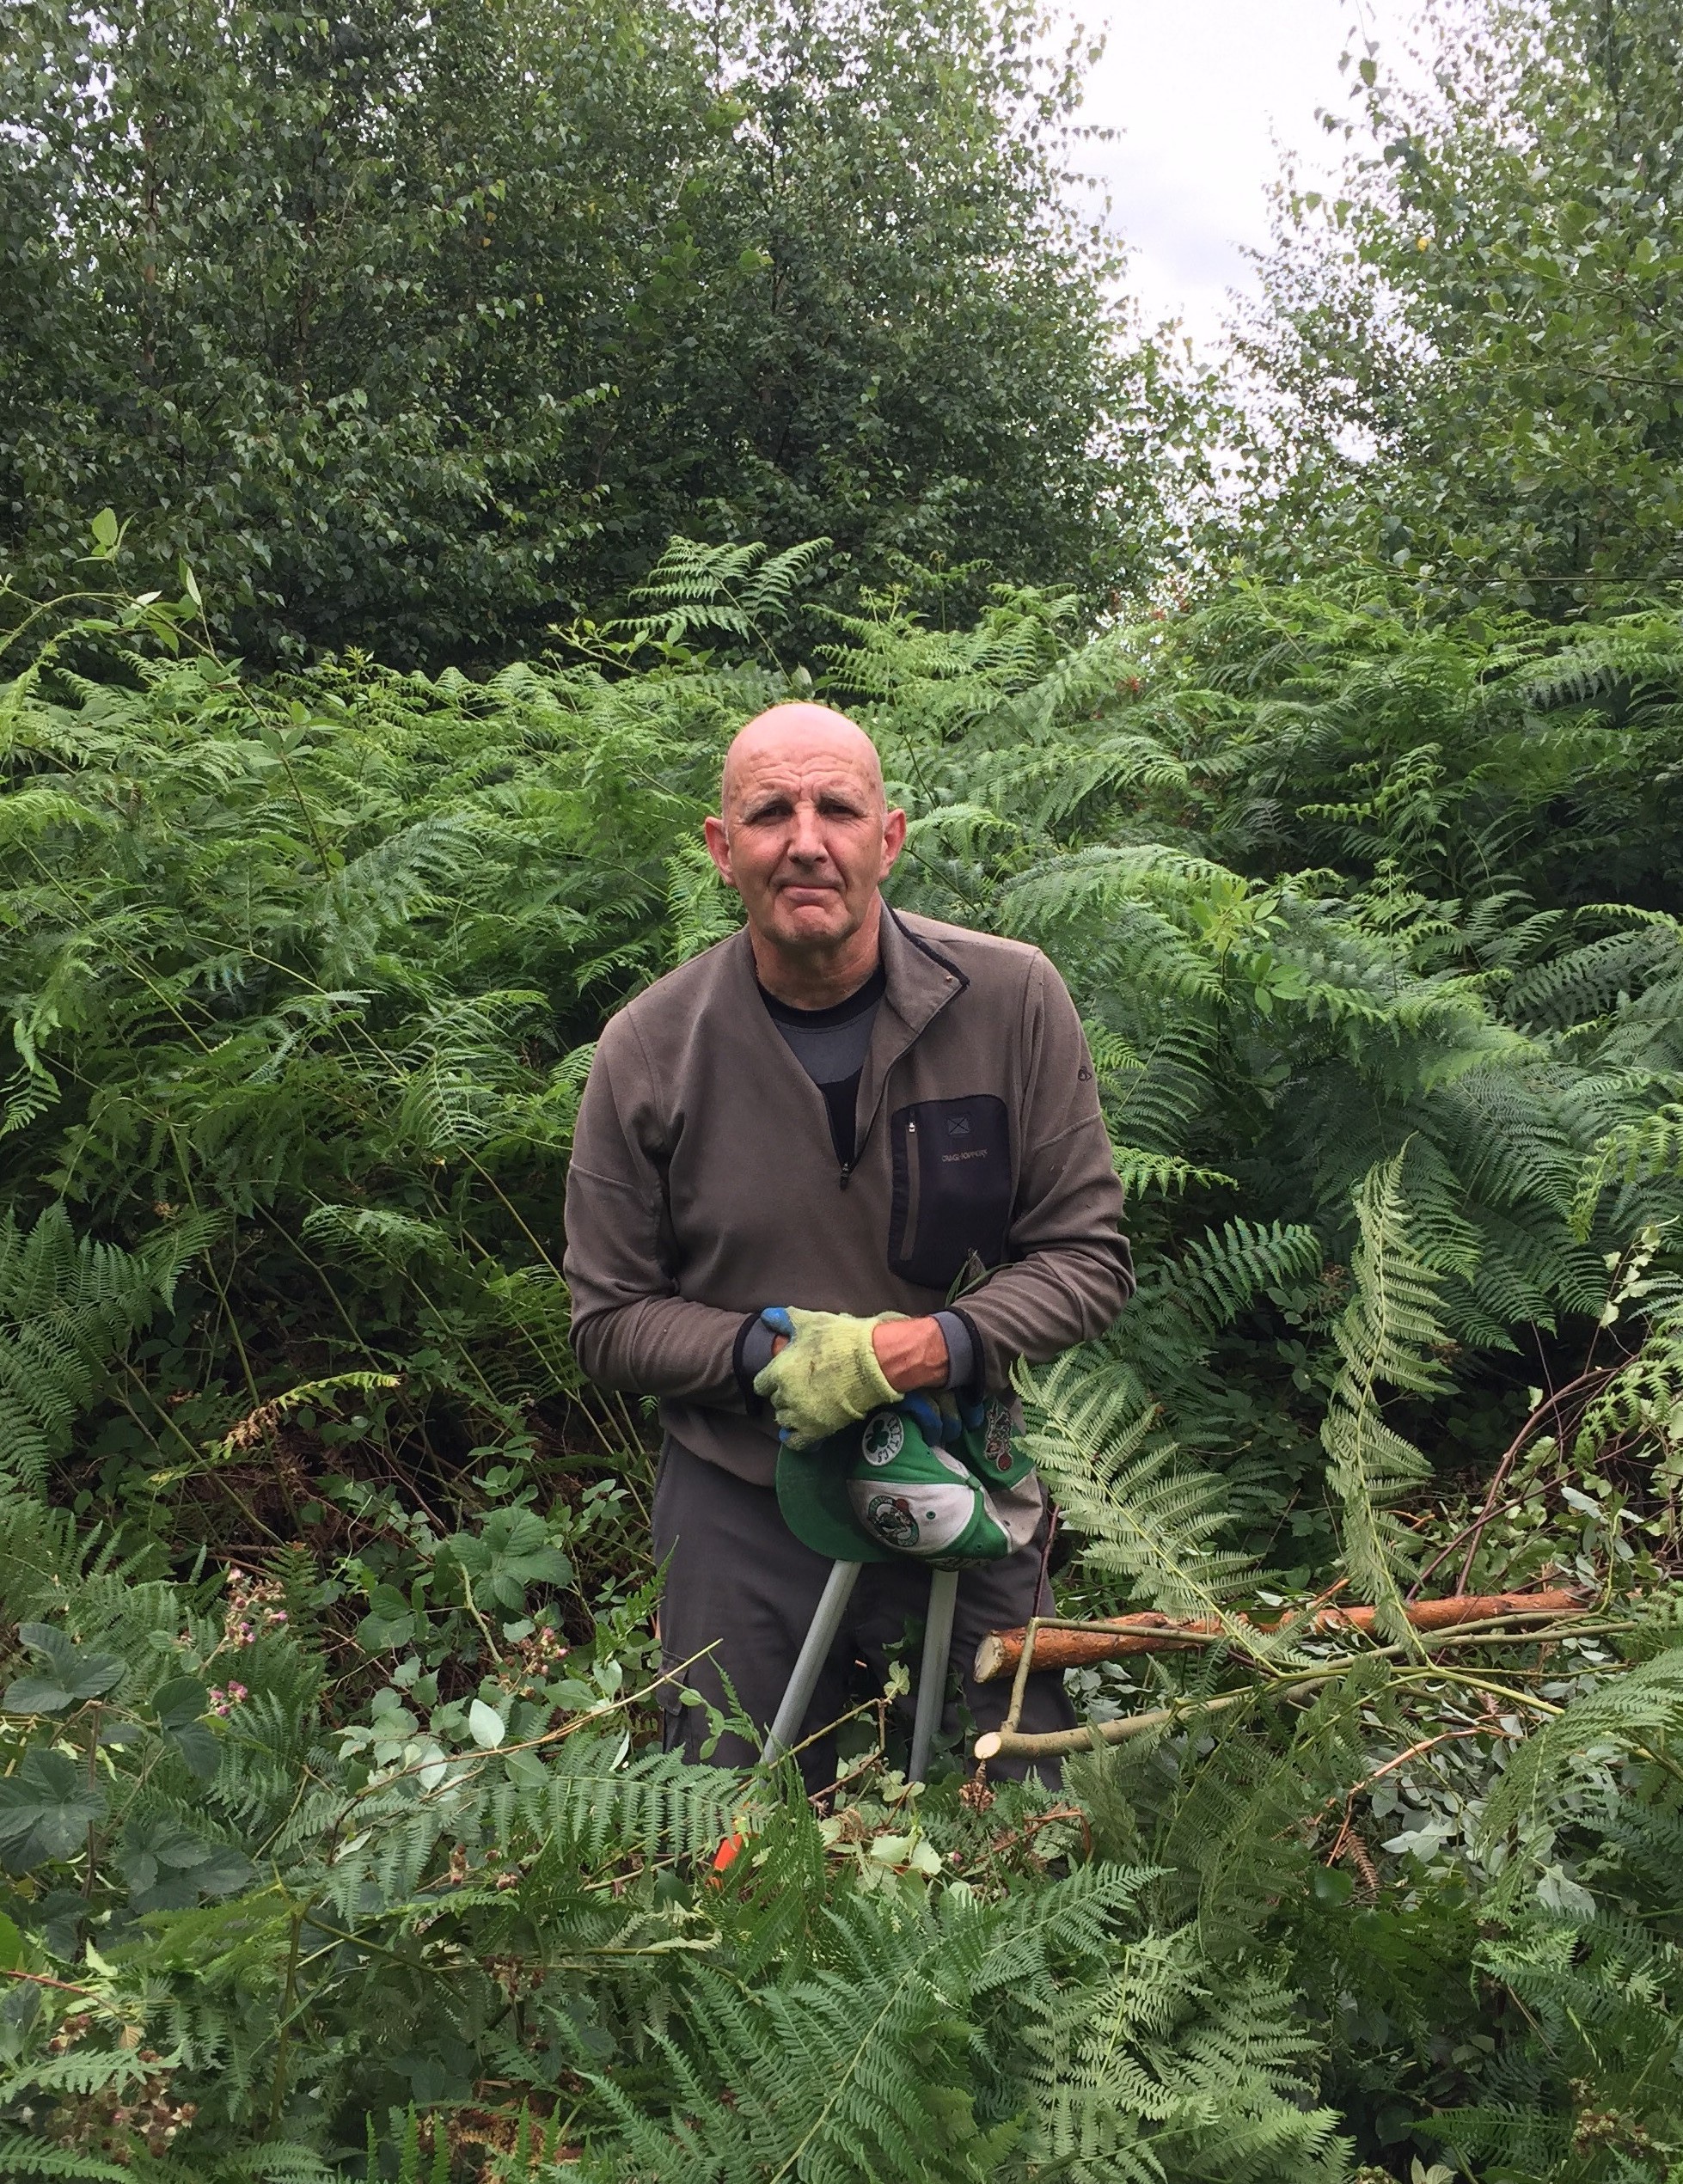 Volunteer Pete standing in the Forest holding loppers